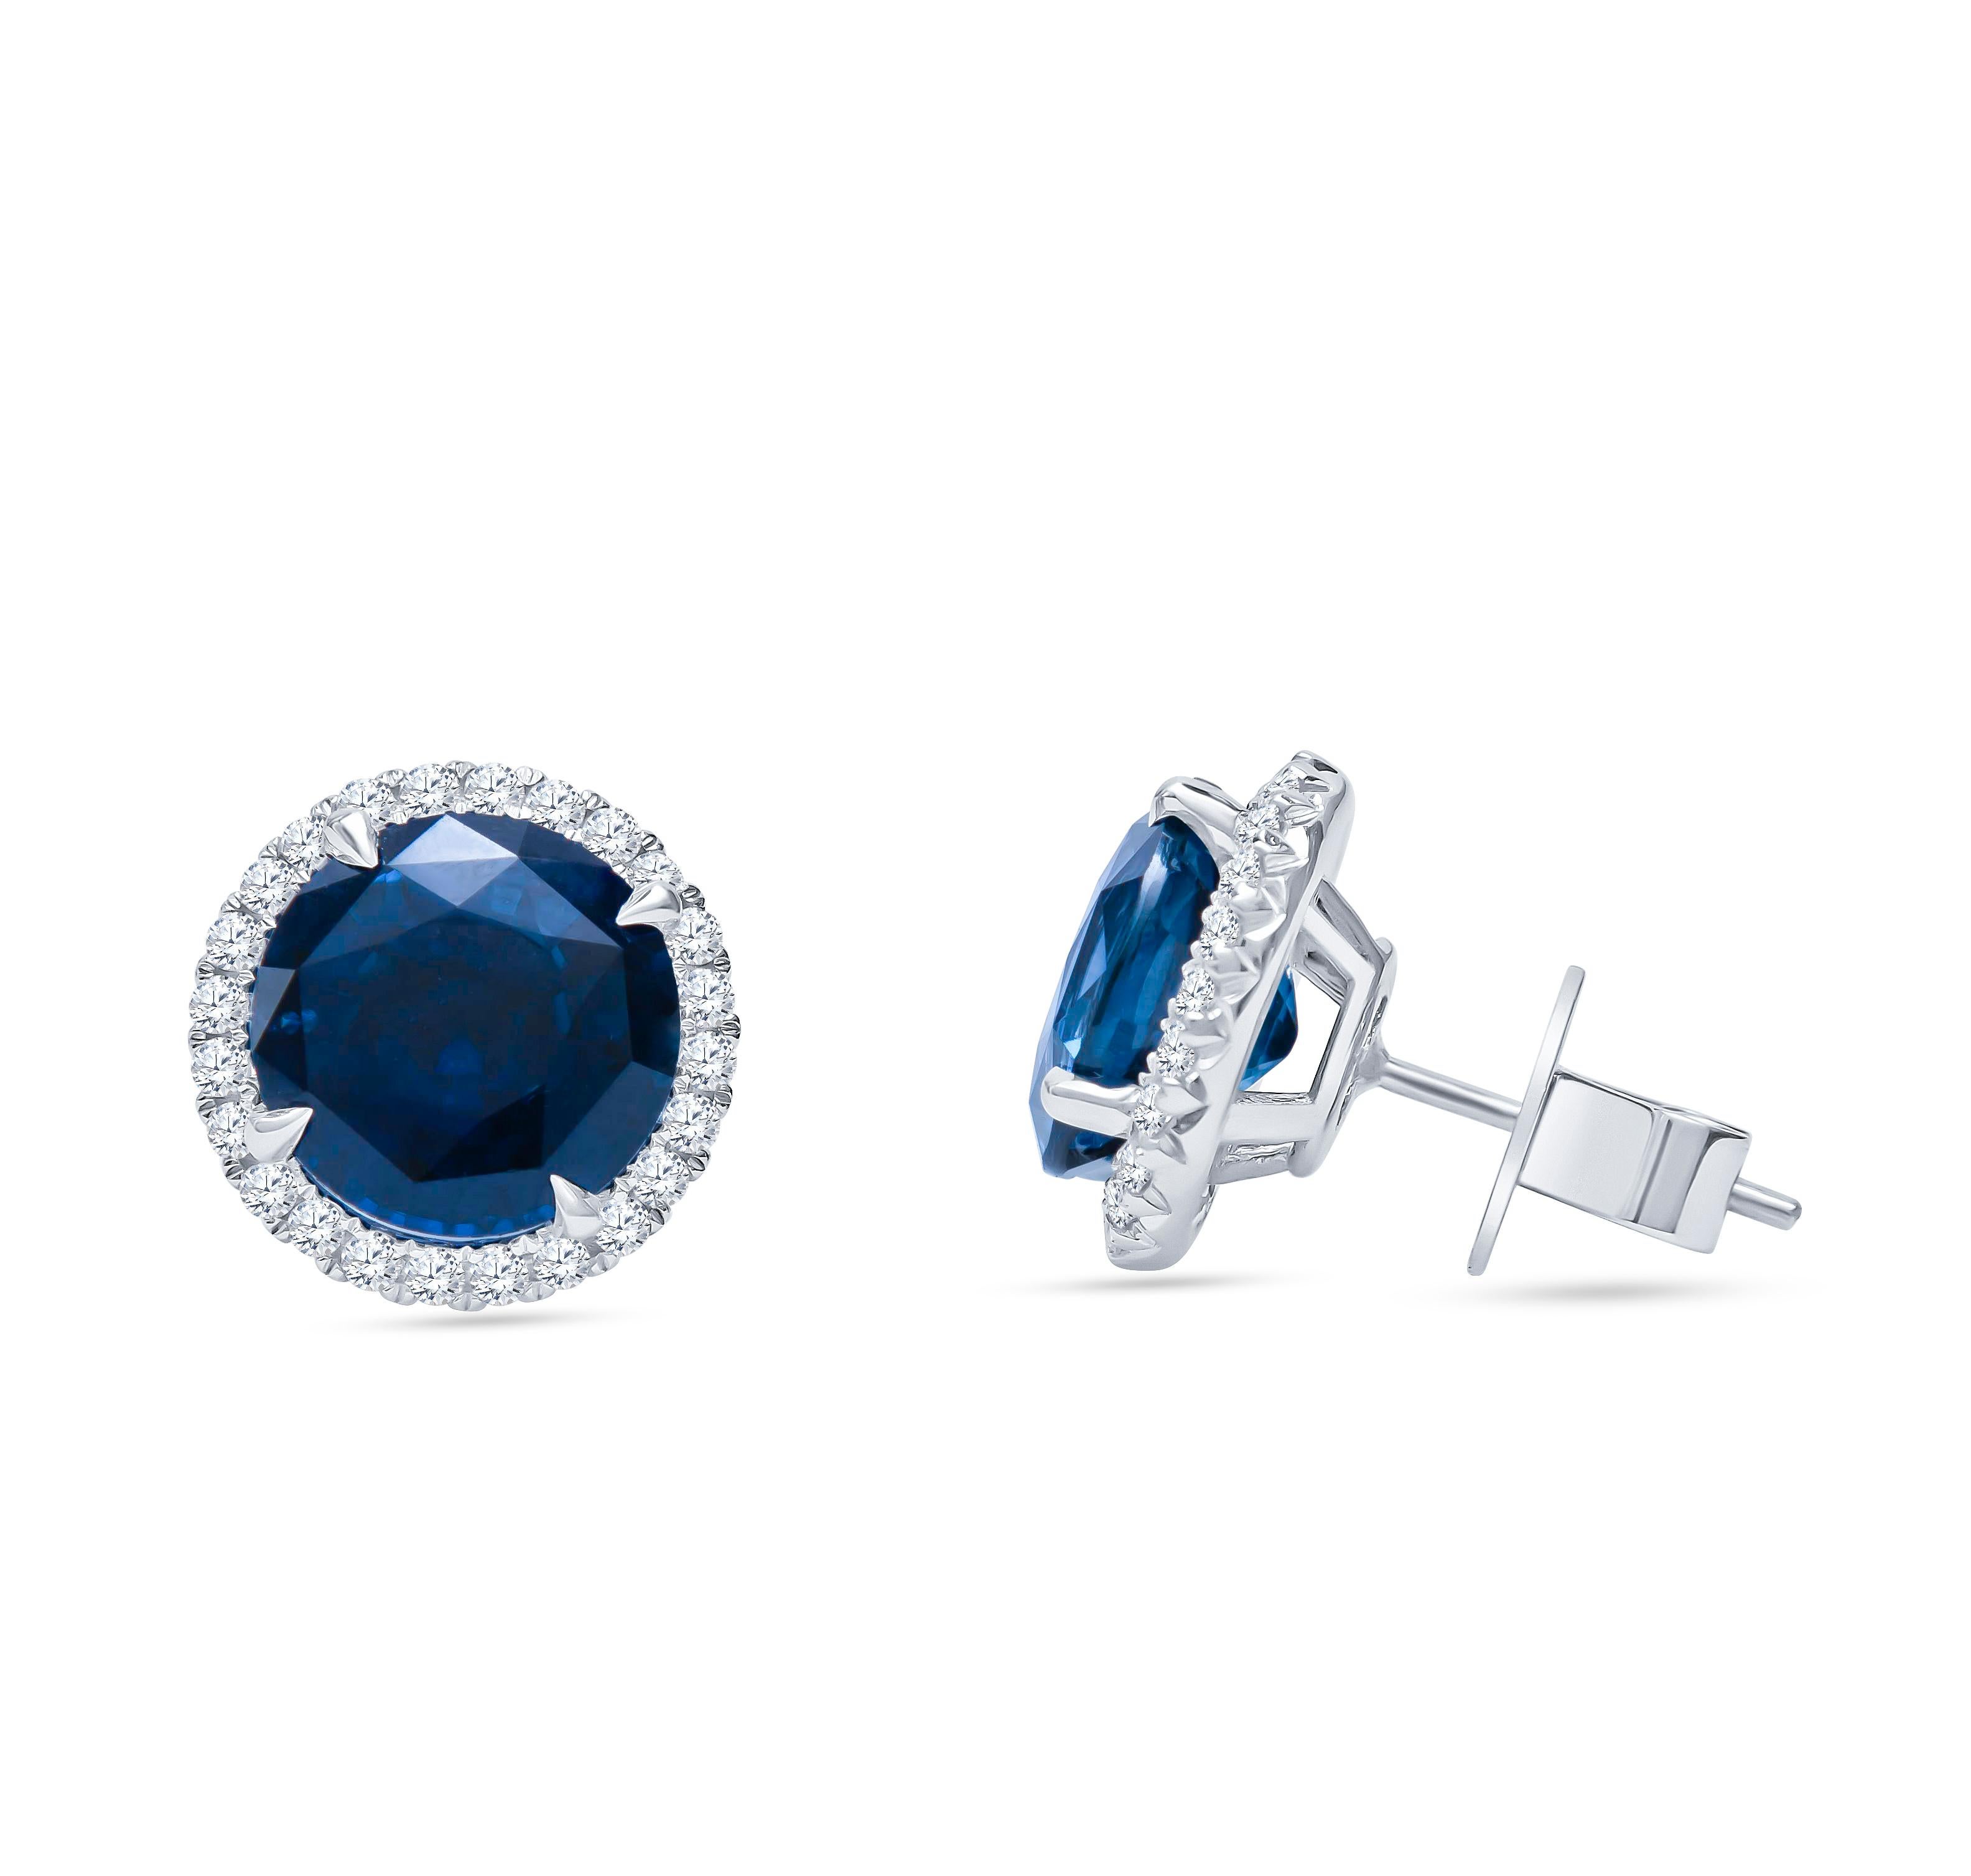 18K white gold round halo stud earrings featuring 10.01 carats total weight in two round natural blue sapphires and 0.64 carats total of round brilliant cut diamonds. These gorgeous earrings are custom made in our workshop here in Houston and are of